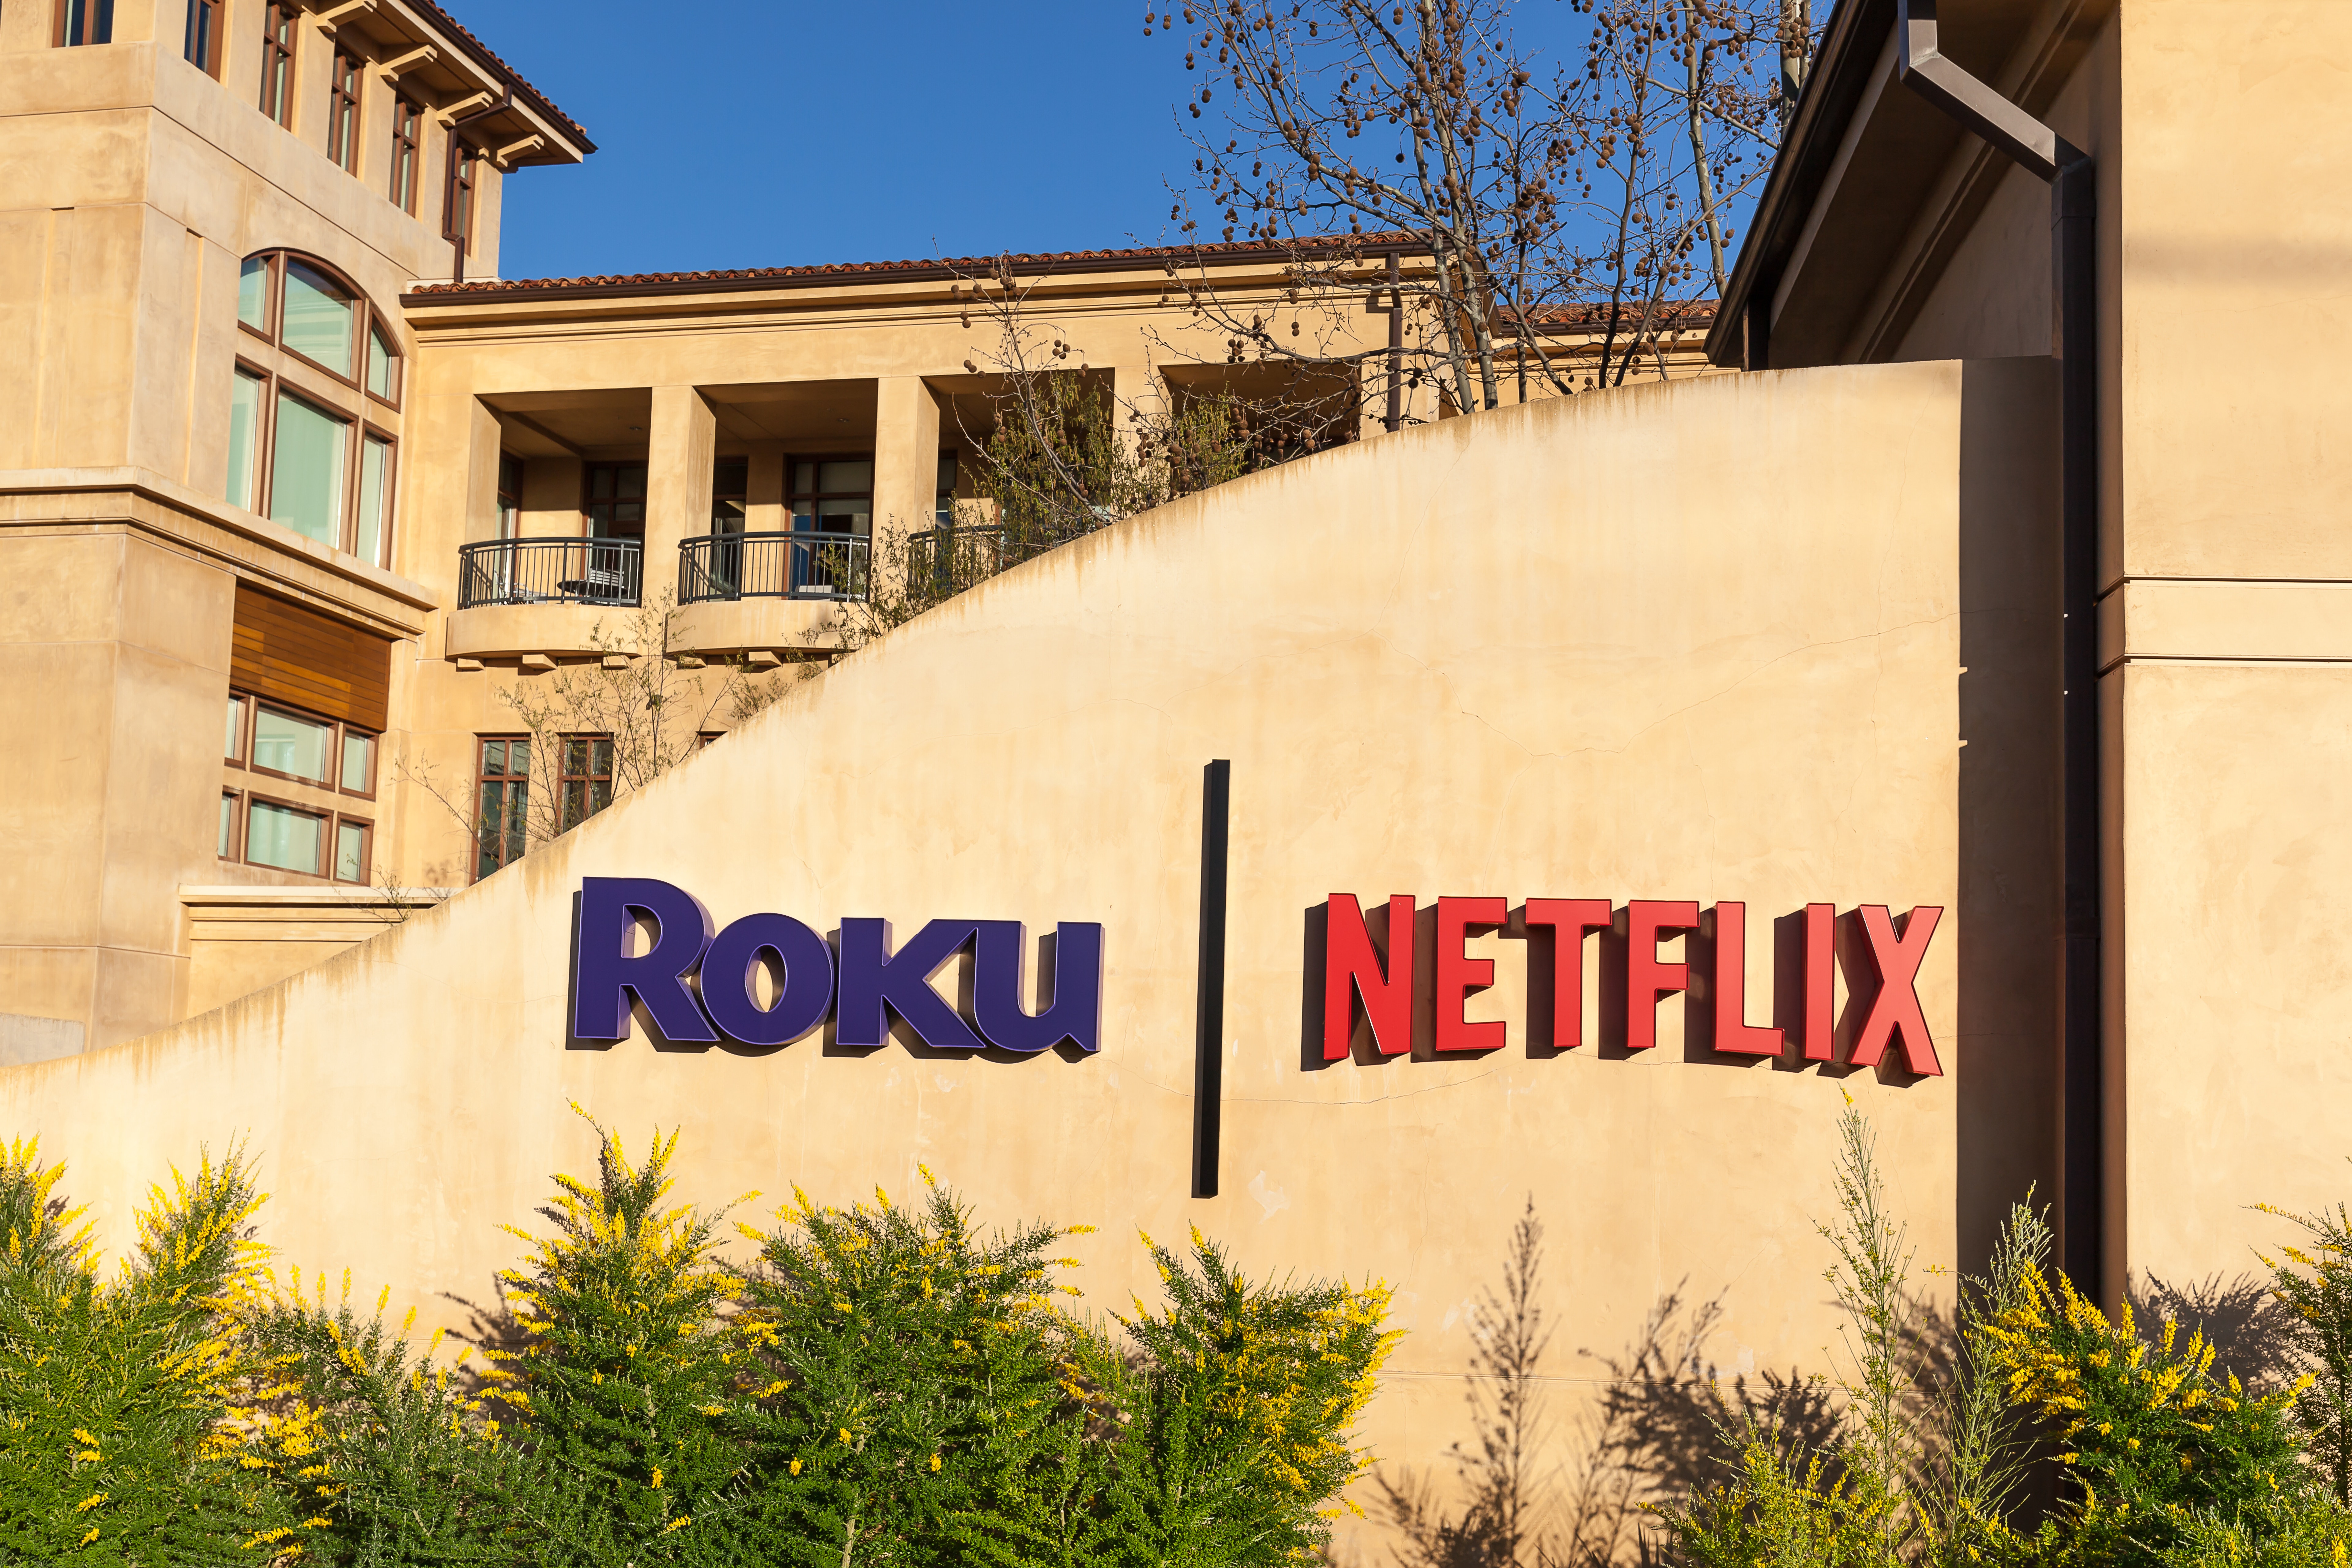 3 Reasons Why This Analyst Thinks A Netflix-Roku Deal Will Not Materialize